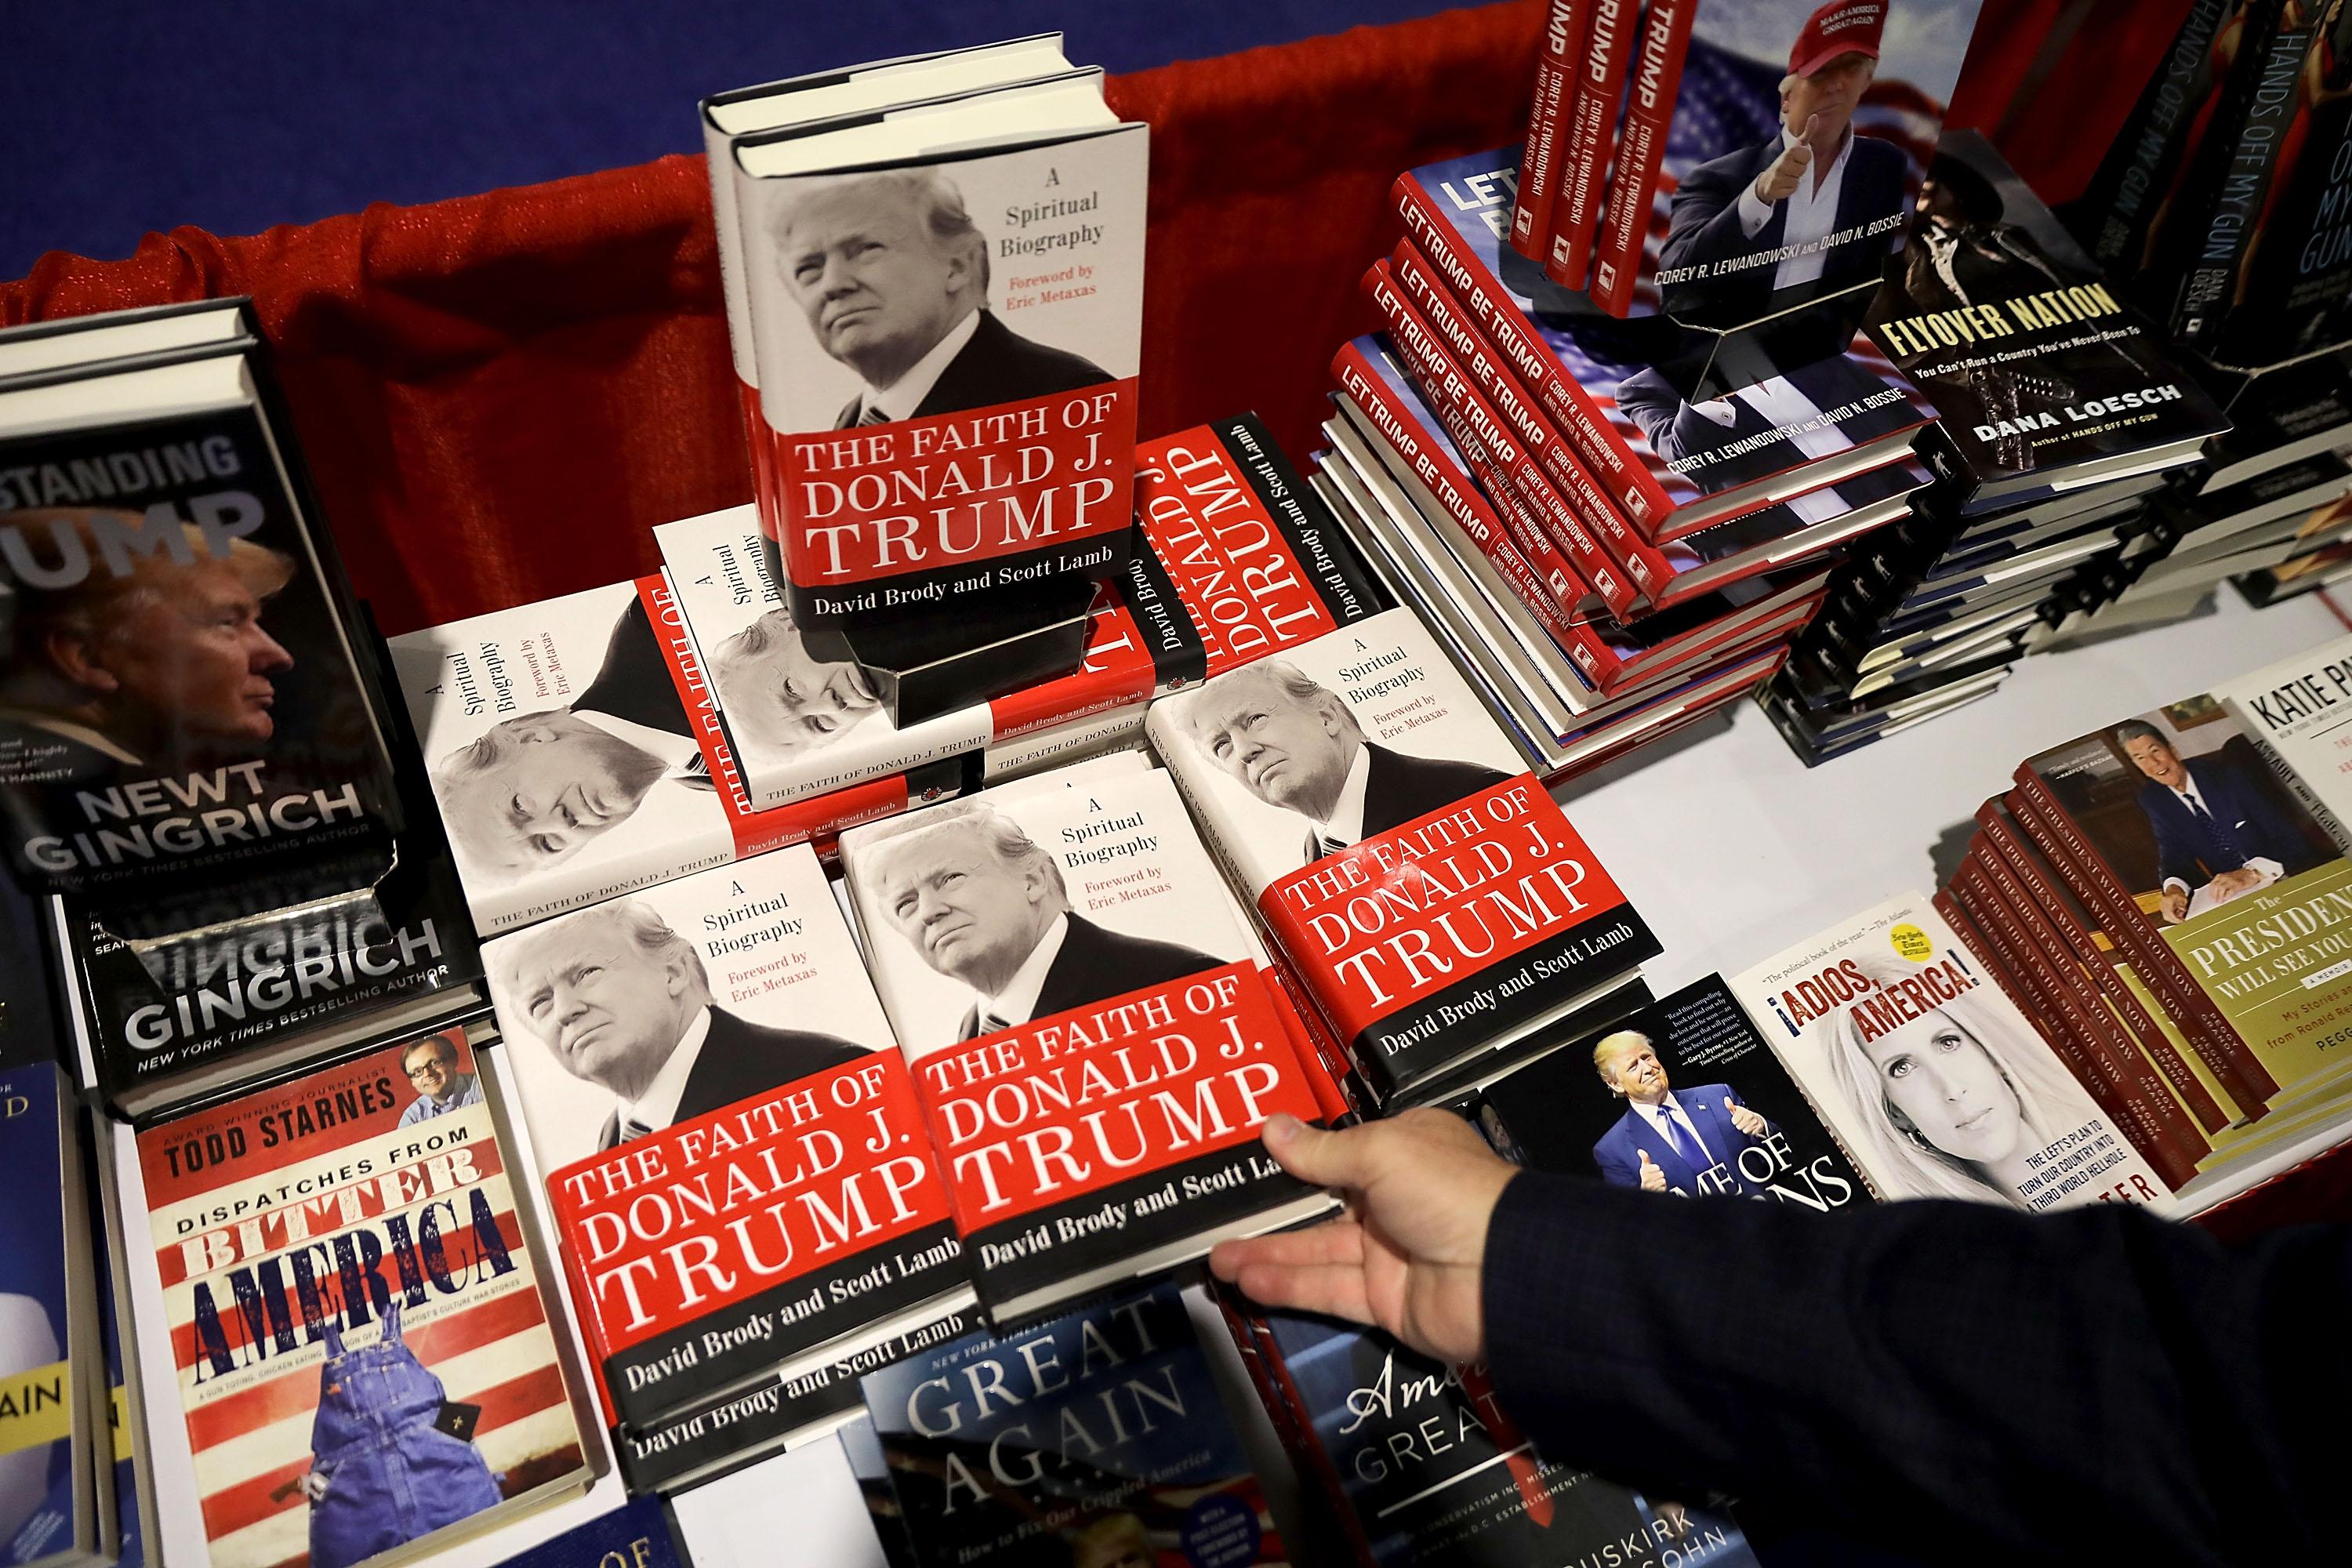 NATIONAL HARBOR, MD - FEBRUARY 23:  Books about Donald Trump and other right wing subjects are for sale inside the Conservative Political Action Conference Hub at the Gaylord National Resort and Convention Center February 23, 2018 in National Harbor, Maryland. Earlier in the day U.S. President Donald Trump addressed CPAC, the largest annual gathering of conservatives in the nation.  (Photo by Chip Somodevilla/Getty Images)